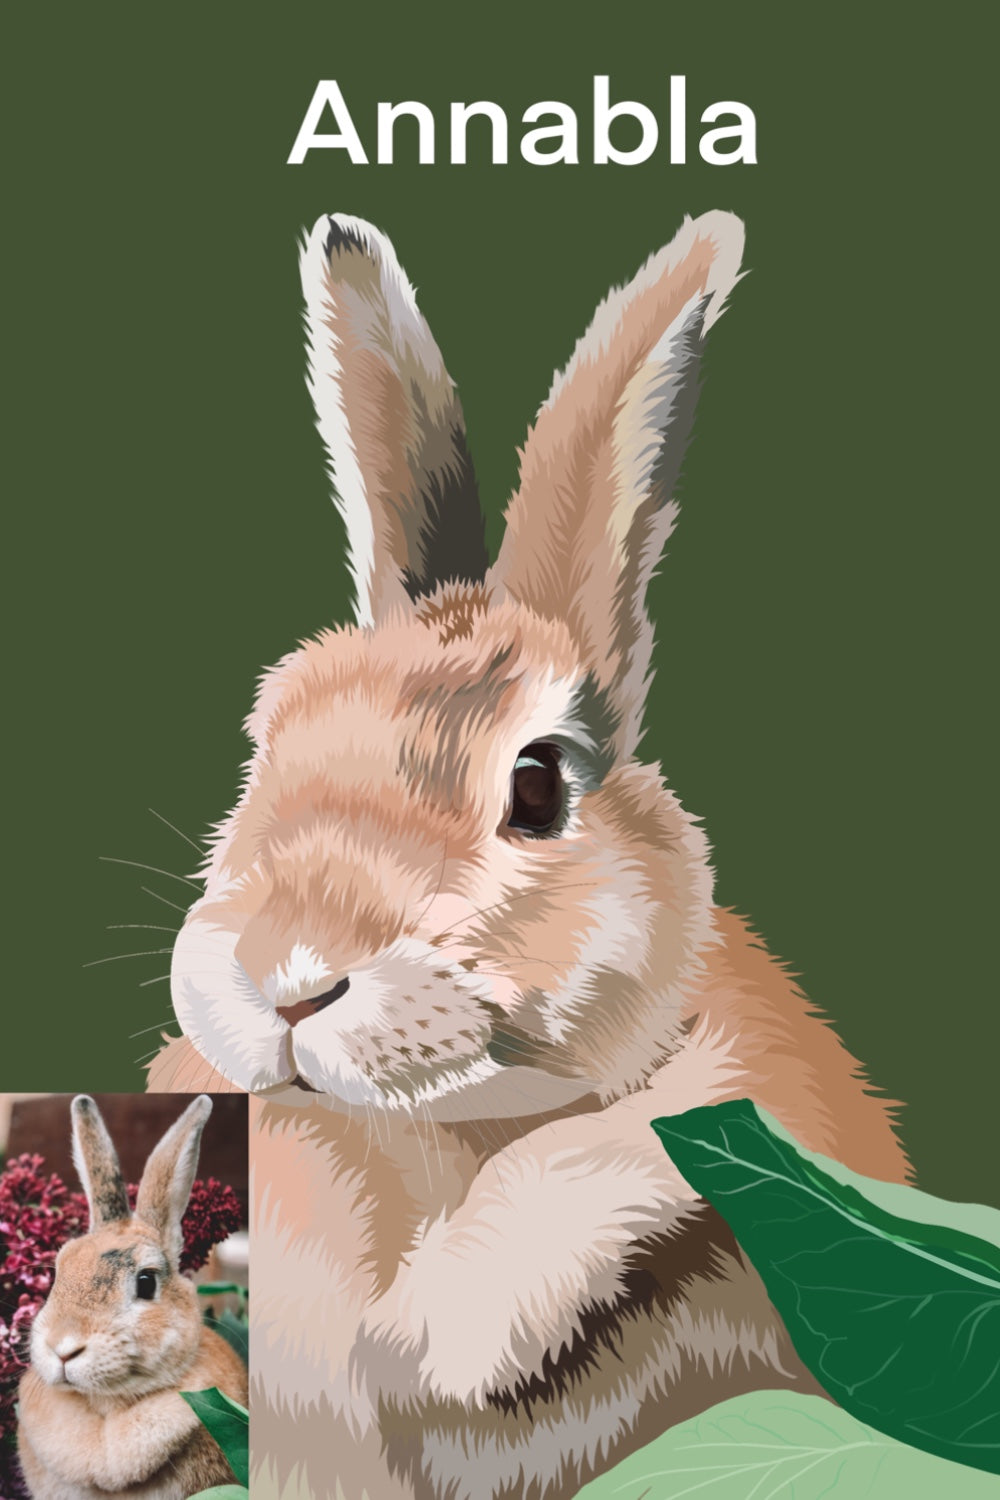 Rabbit in oil painting style with green background